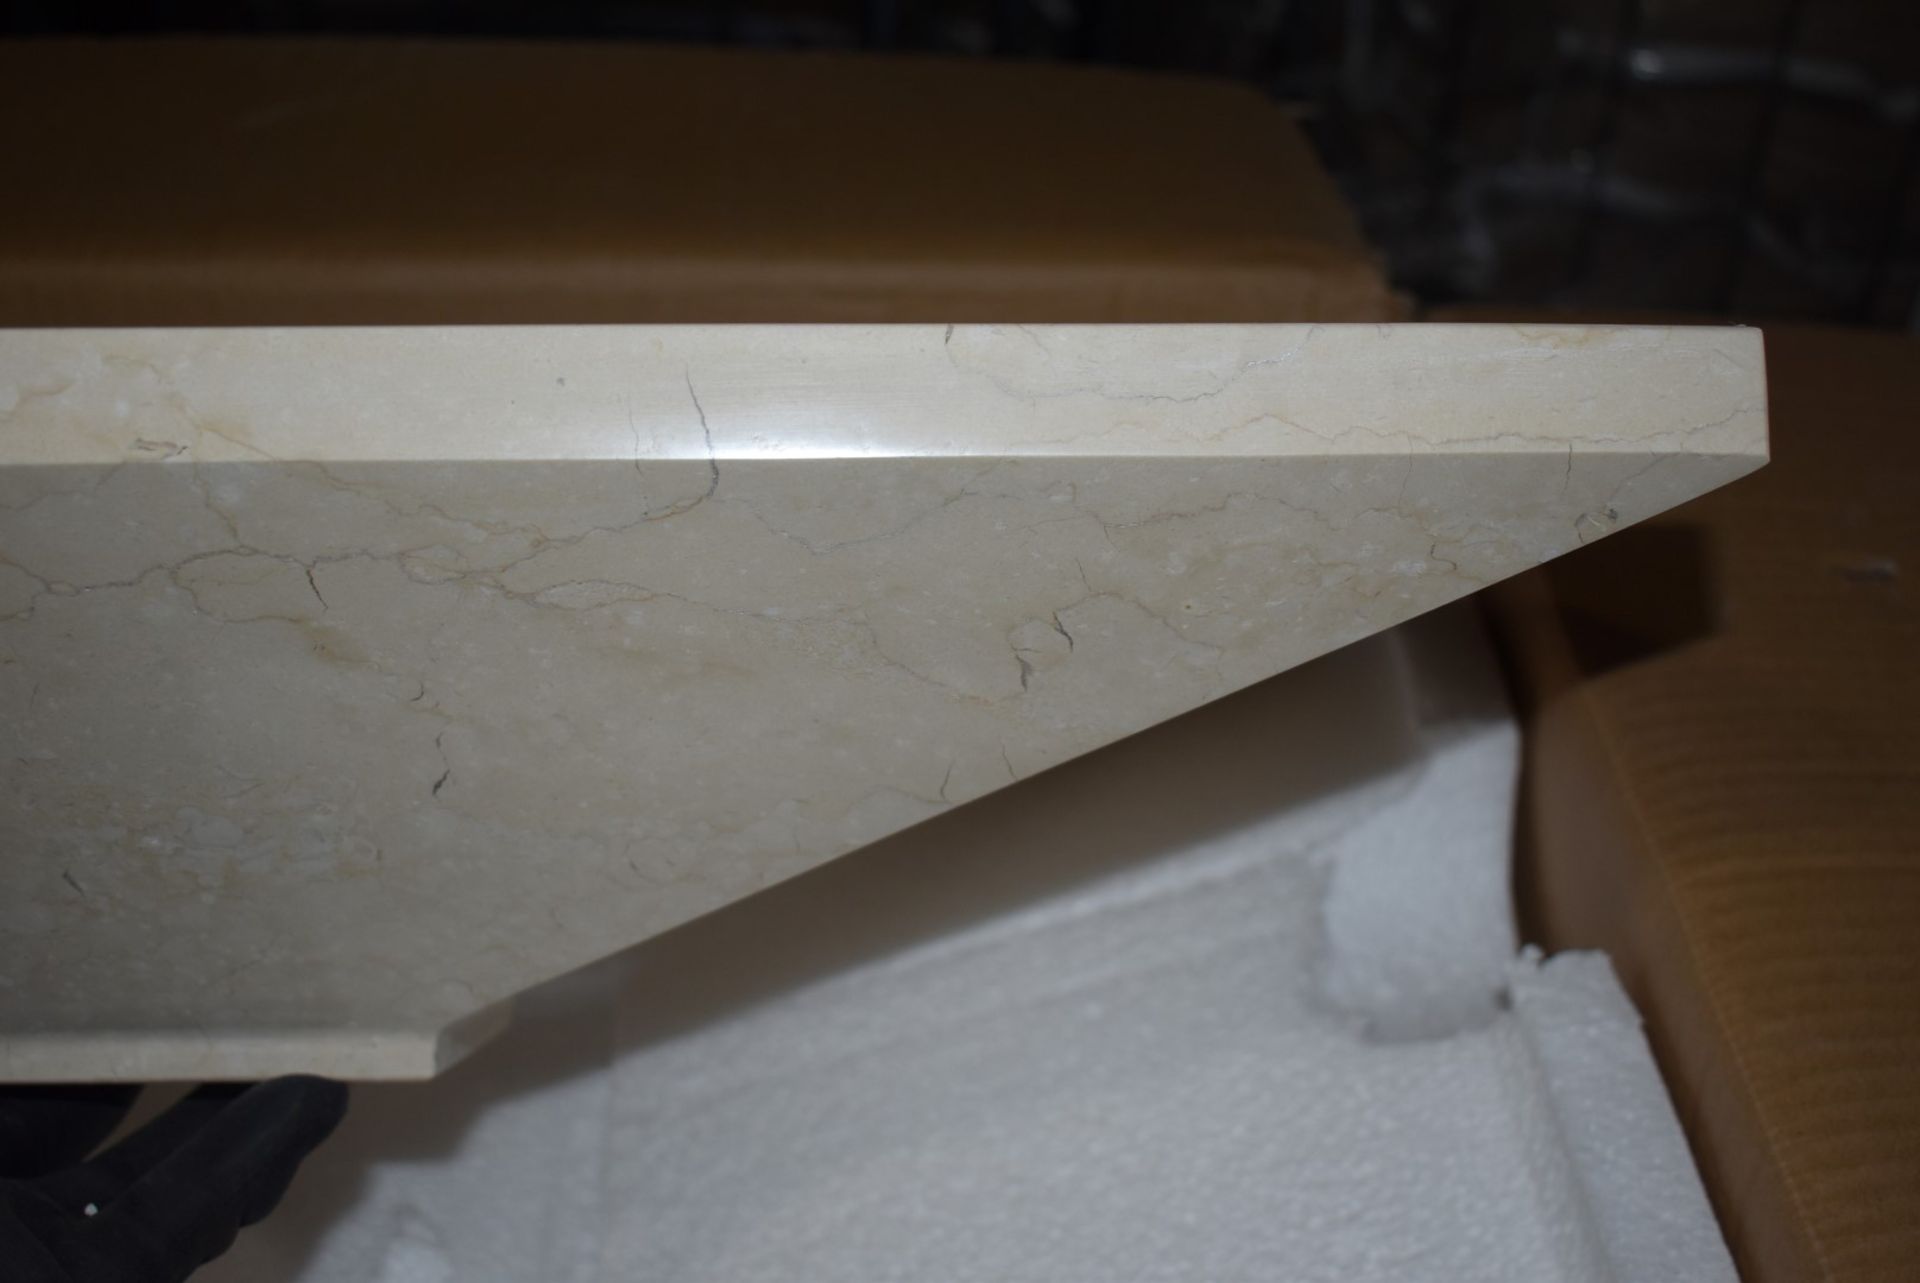 1 x Stonearth 'Karo' Solid Travertine Stone Countertop Sink Basin - New Boxed Stock - RRP £525 - - Image 6 of 8